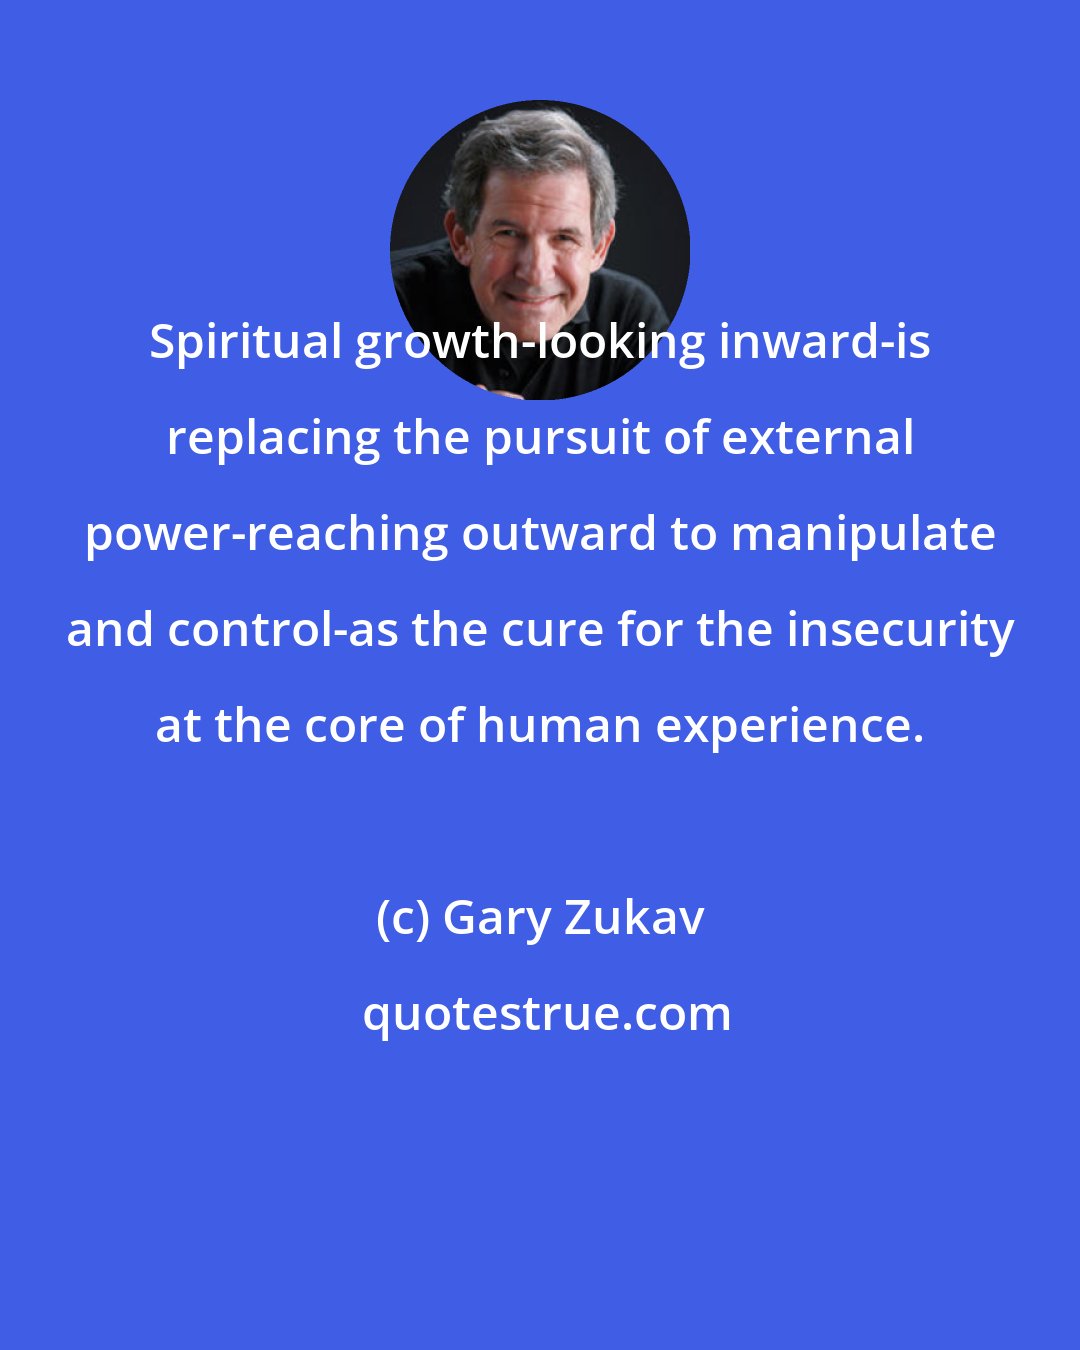 Gary Zukav: Spiritual growth-looking inward-is replacing the pursuit of external power-reaching outward to manipulate and control-as the cure for the insecurity at the core of human experience.